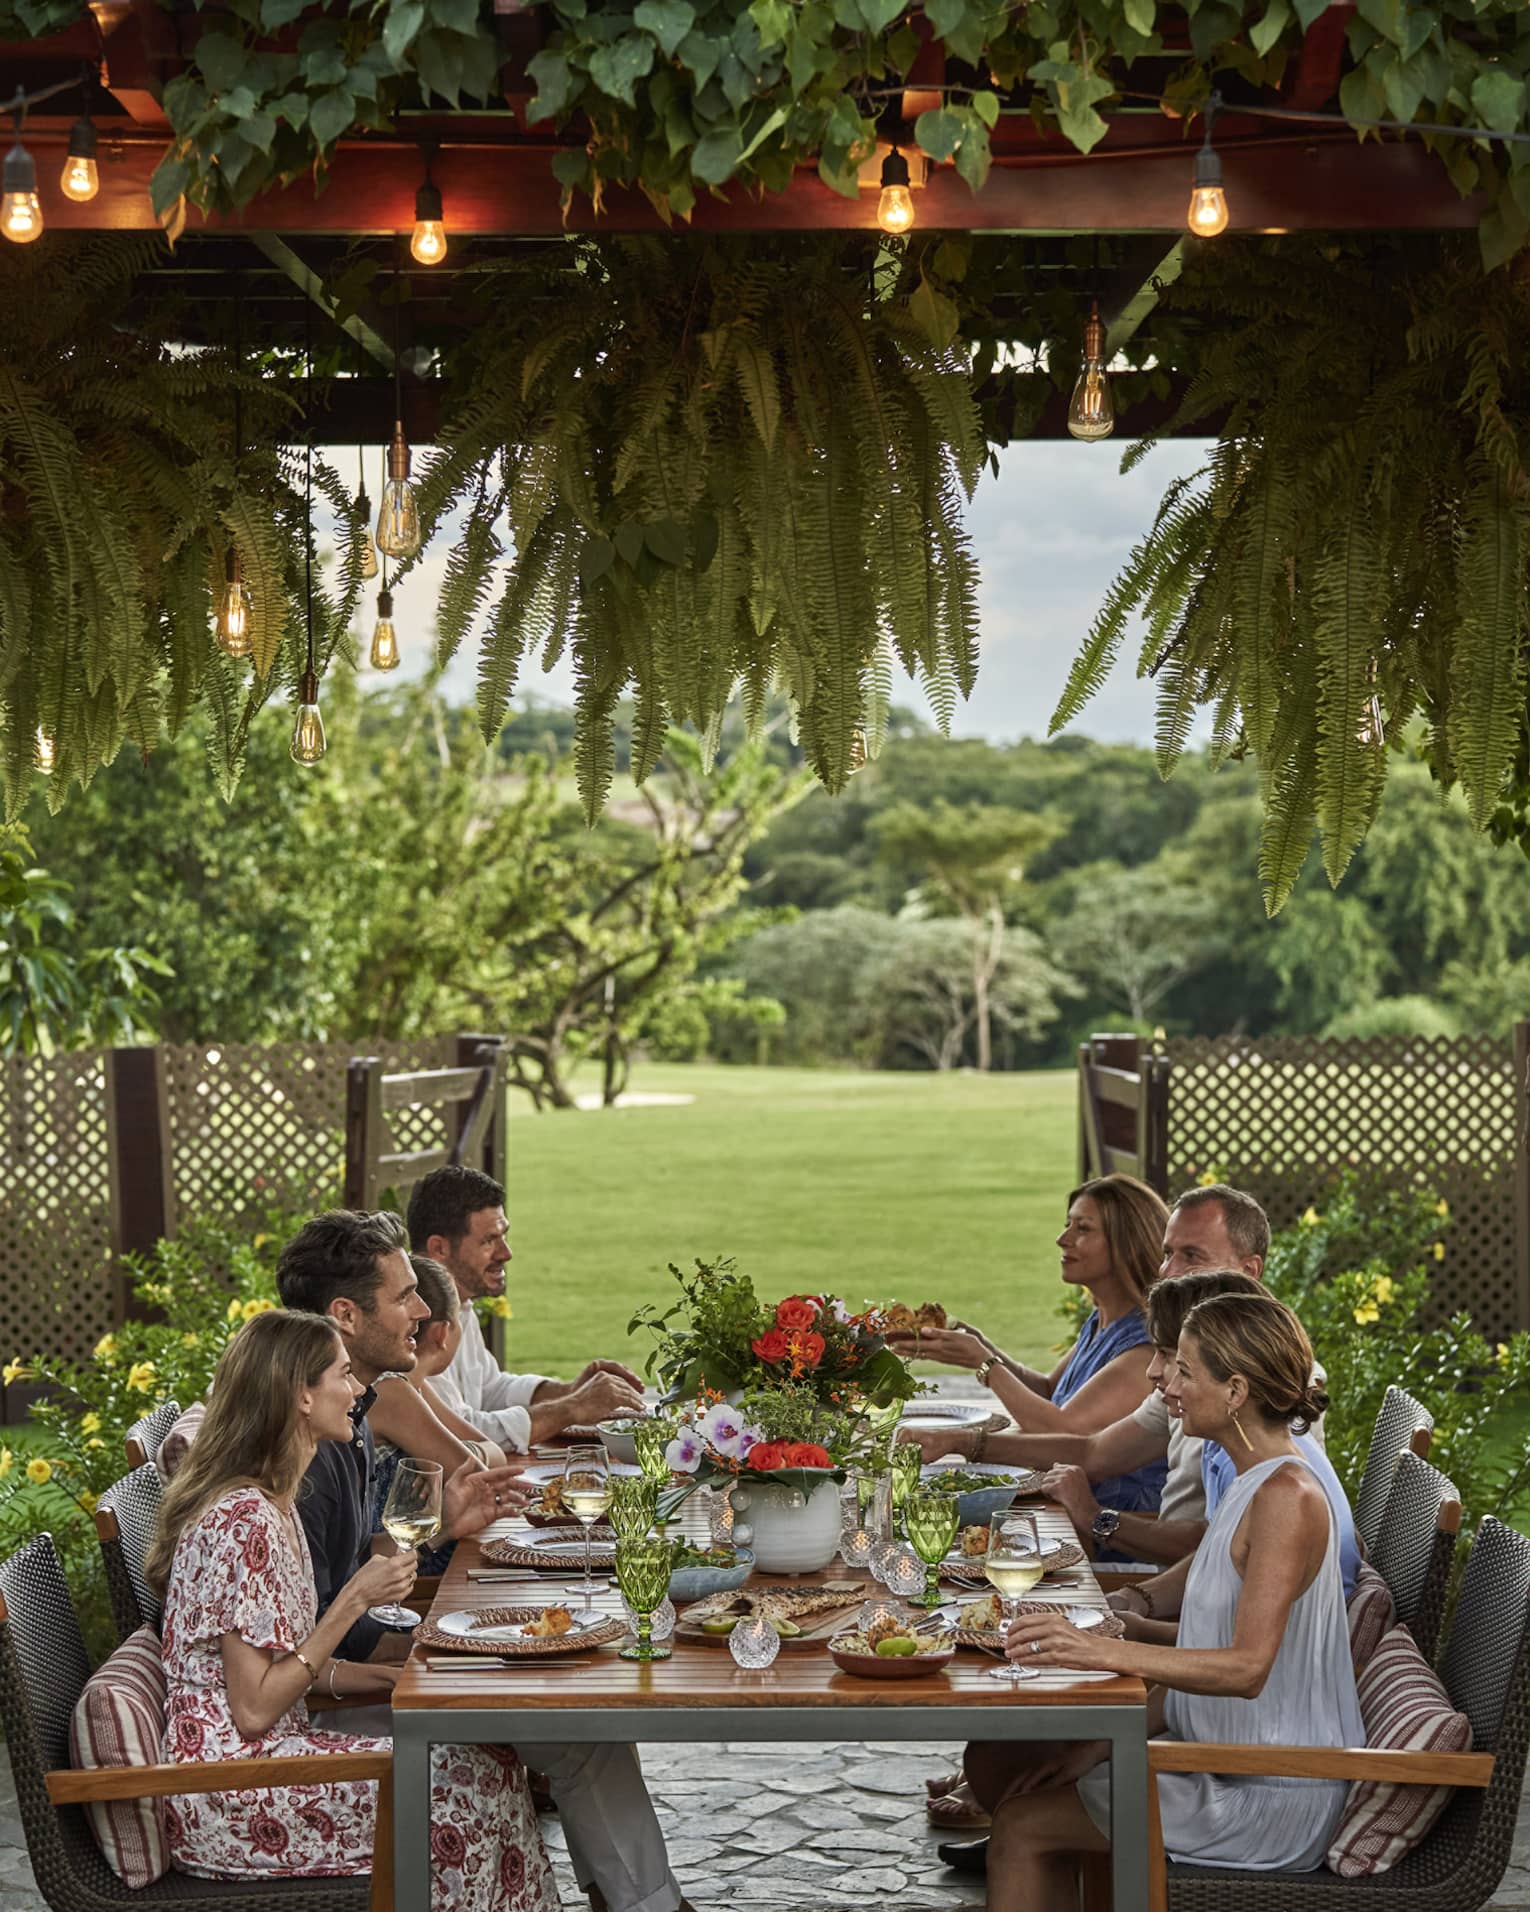 Eight people sit around a long dining table set up outside beneath a canopy of greenery and string lights